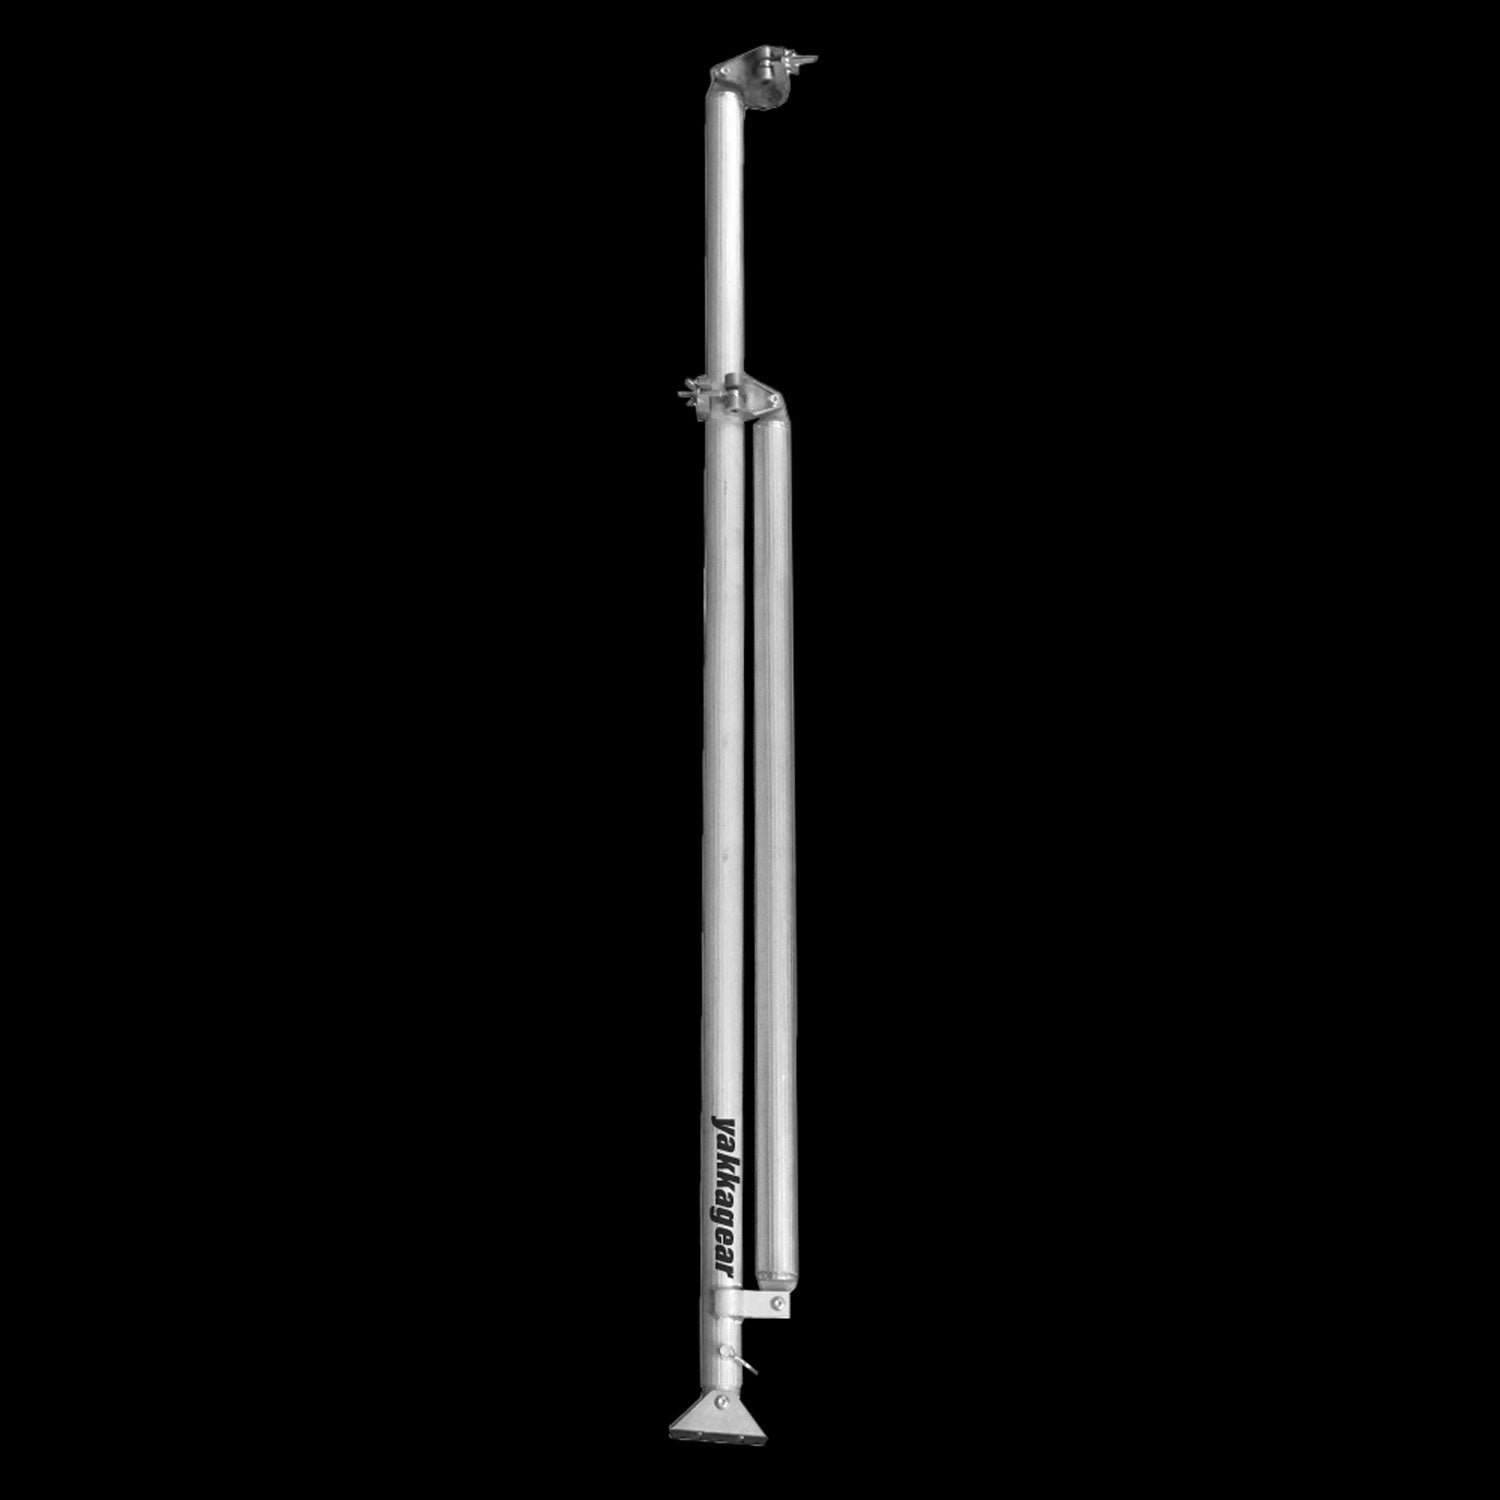 Yakka Gear Australia Stabiliser Legs for 2.5m Length 1.3m Wide 4.6m, 6.6m, and 8.6m reach wide scaffolding tower access equipment with working height of 2.6m, 4.6m, and 6.6m, detailed view of the stabiliser leg from the side before being extended, with black background. 